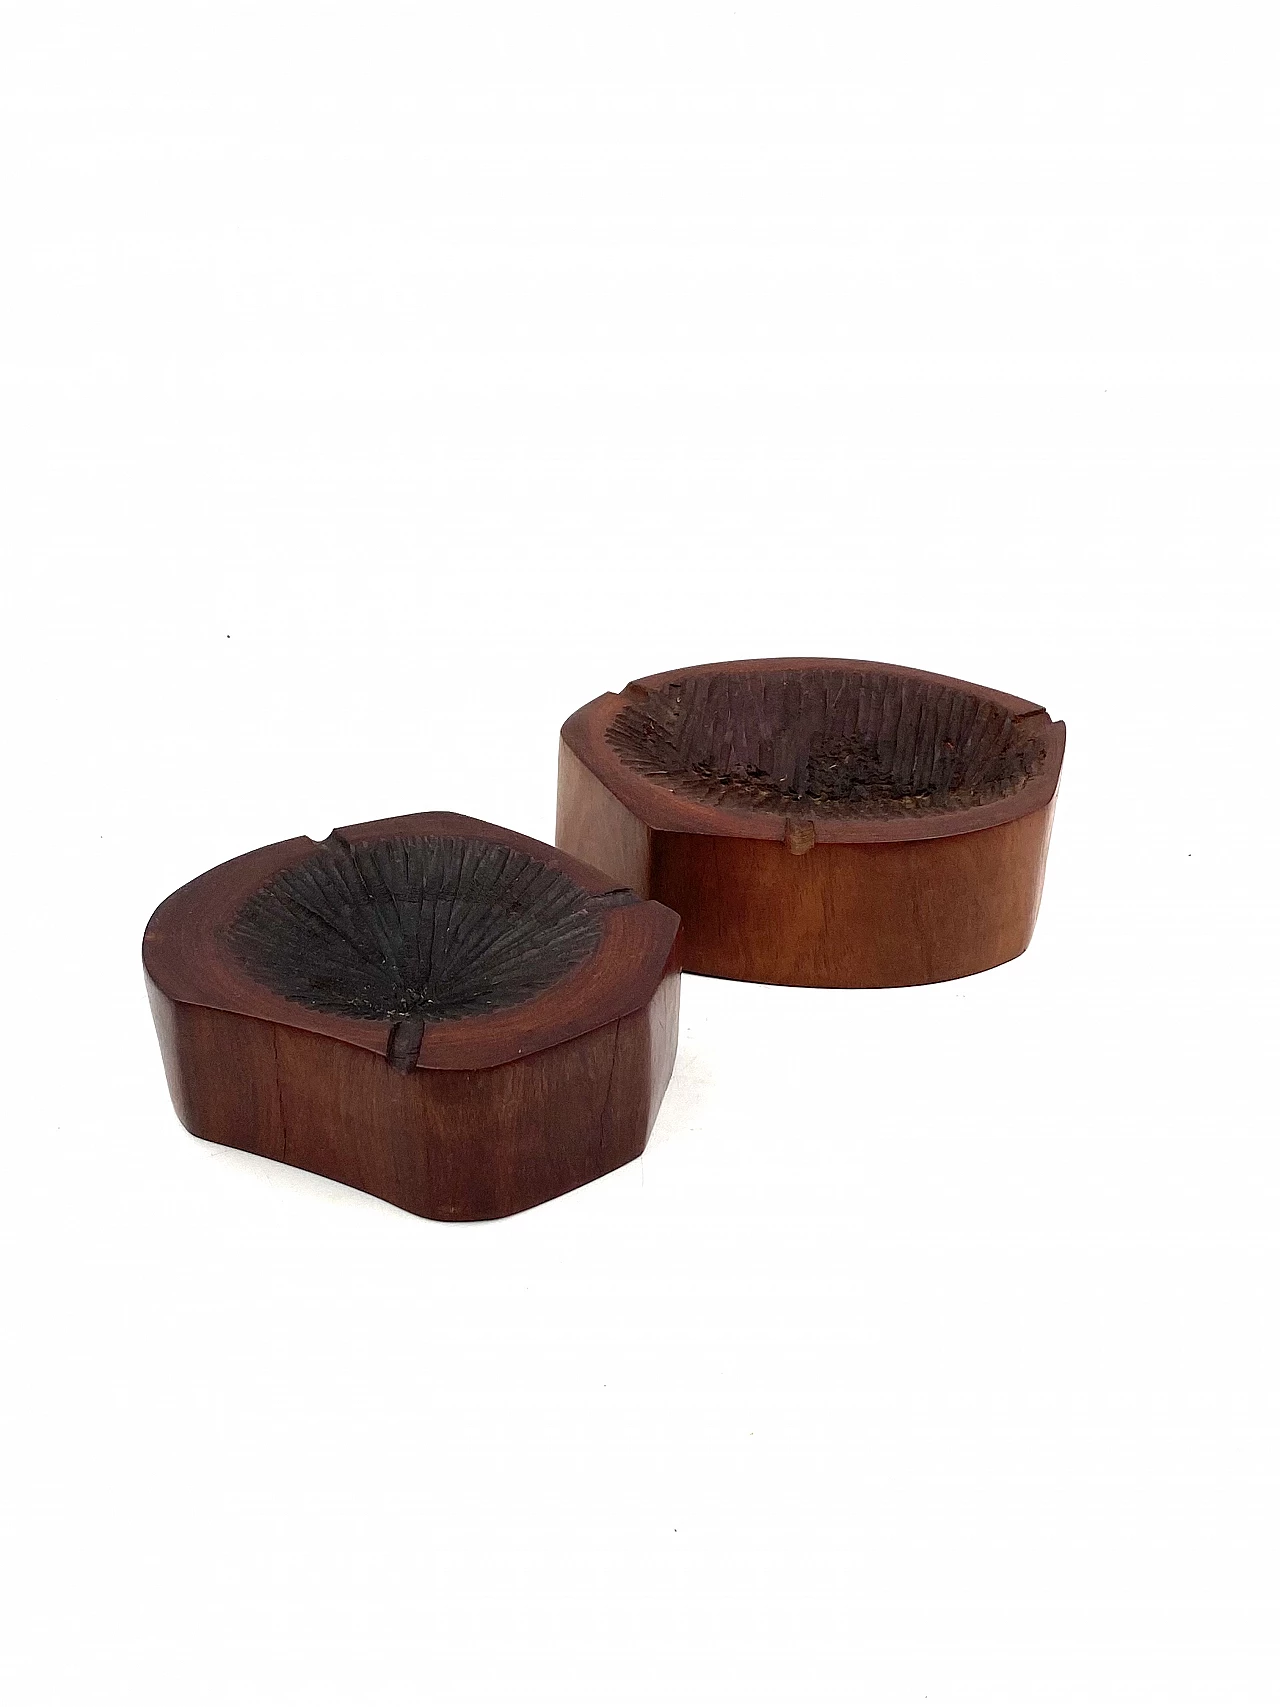 Pair of wooden ashtrays in Monique Gerber's style, 1970s 21